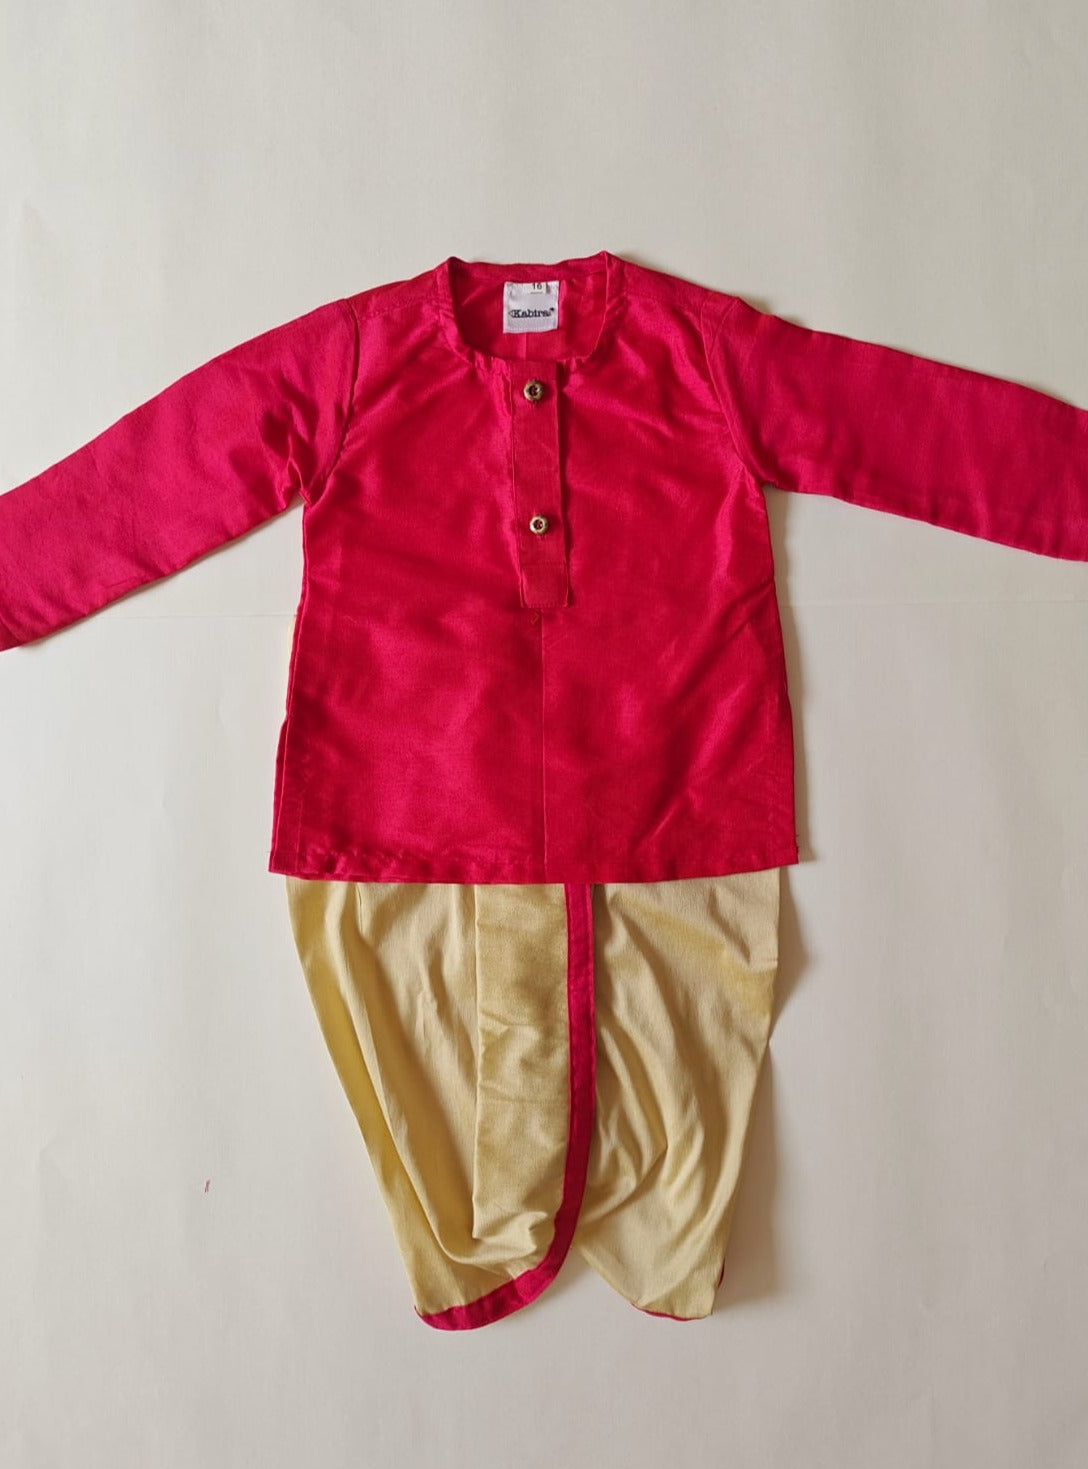 Rani pink cotton silk round neck kurta, Golden cotton silk dhoti with Tussar silk Jacket for Baby Boy.It's the perfect outfit for your baby's naming ceremony,naamkaran,annaprashan ceremony.Traditional dress for Noolukettu Ceremony,Pachavi Puja,cradle ceremony,Rice Ceremony,Chatti Puja etc. Apt gifting idea